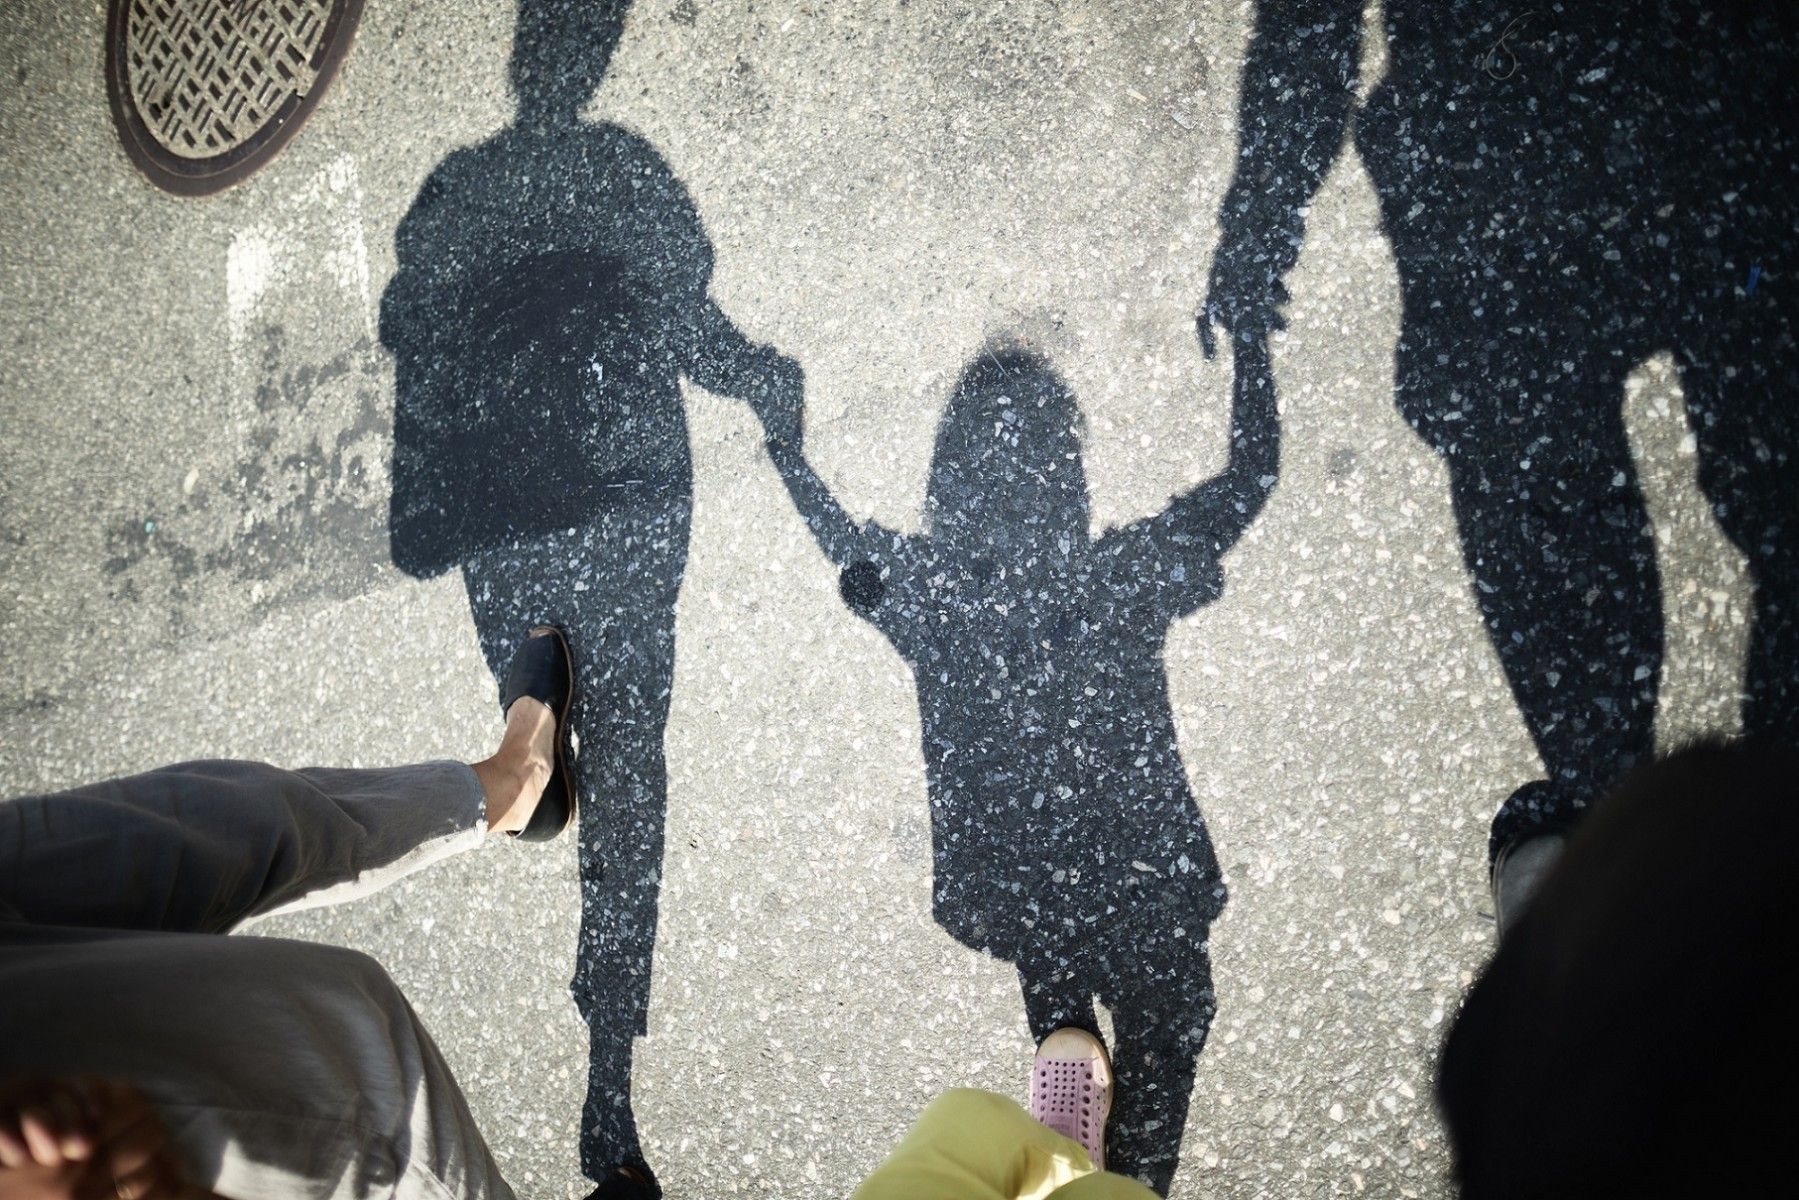 Shadows on pavement reveal a young child holding hands with two adults.